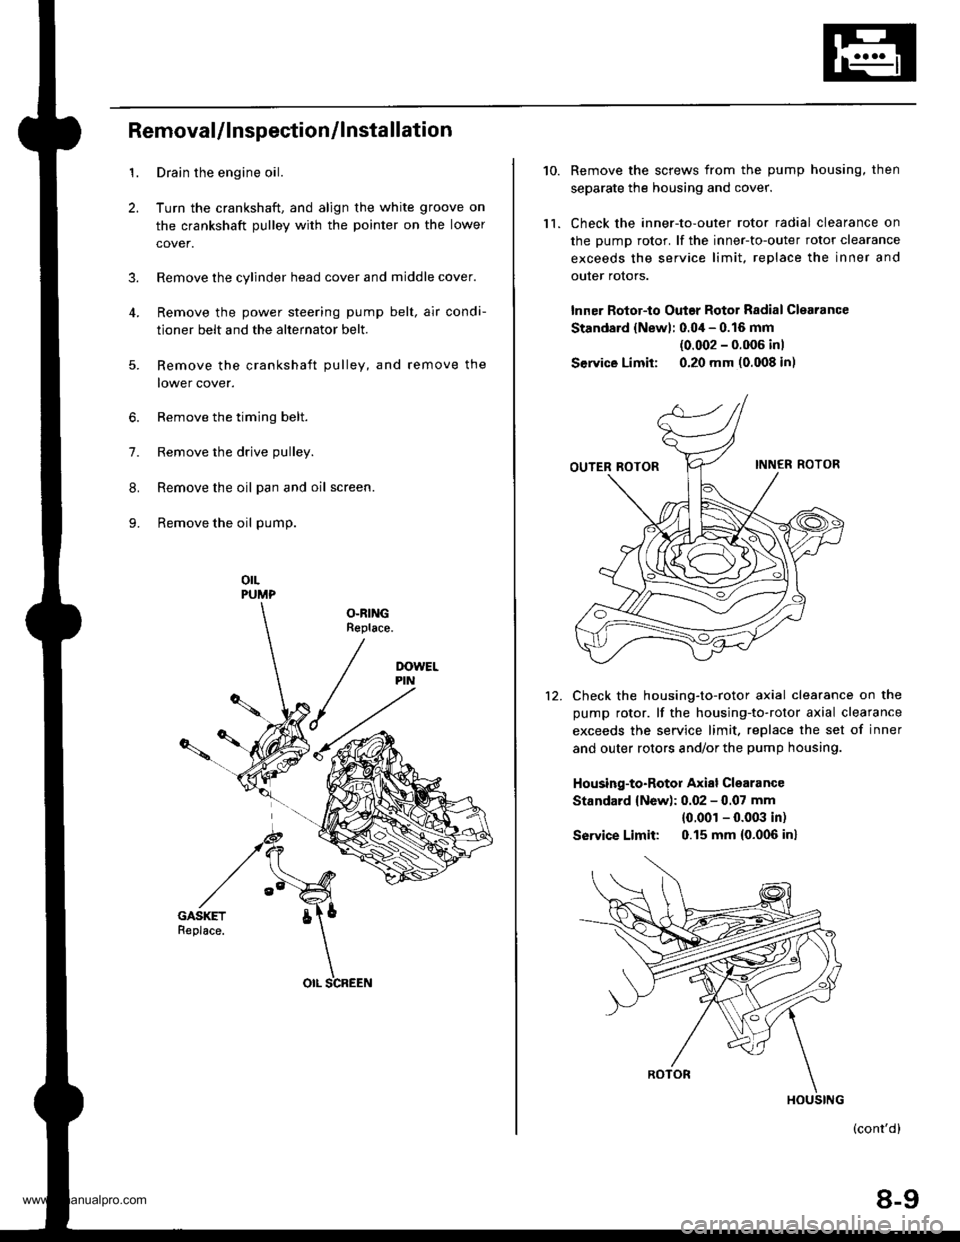 HONDA CR-V 1997 RD1-RD3 / 1.G Owners Guide 
1.
2.
3.
RemovaUlnspection/lnstallation
Drain the engine oil.
Turn the crankshaft, and align the white groove on
the crankshaft pulley with the pointer on the lower
cover.
Remove the cylinder head co